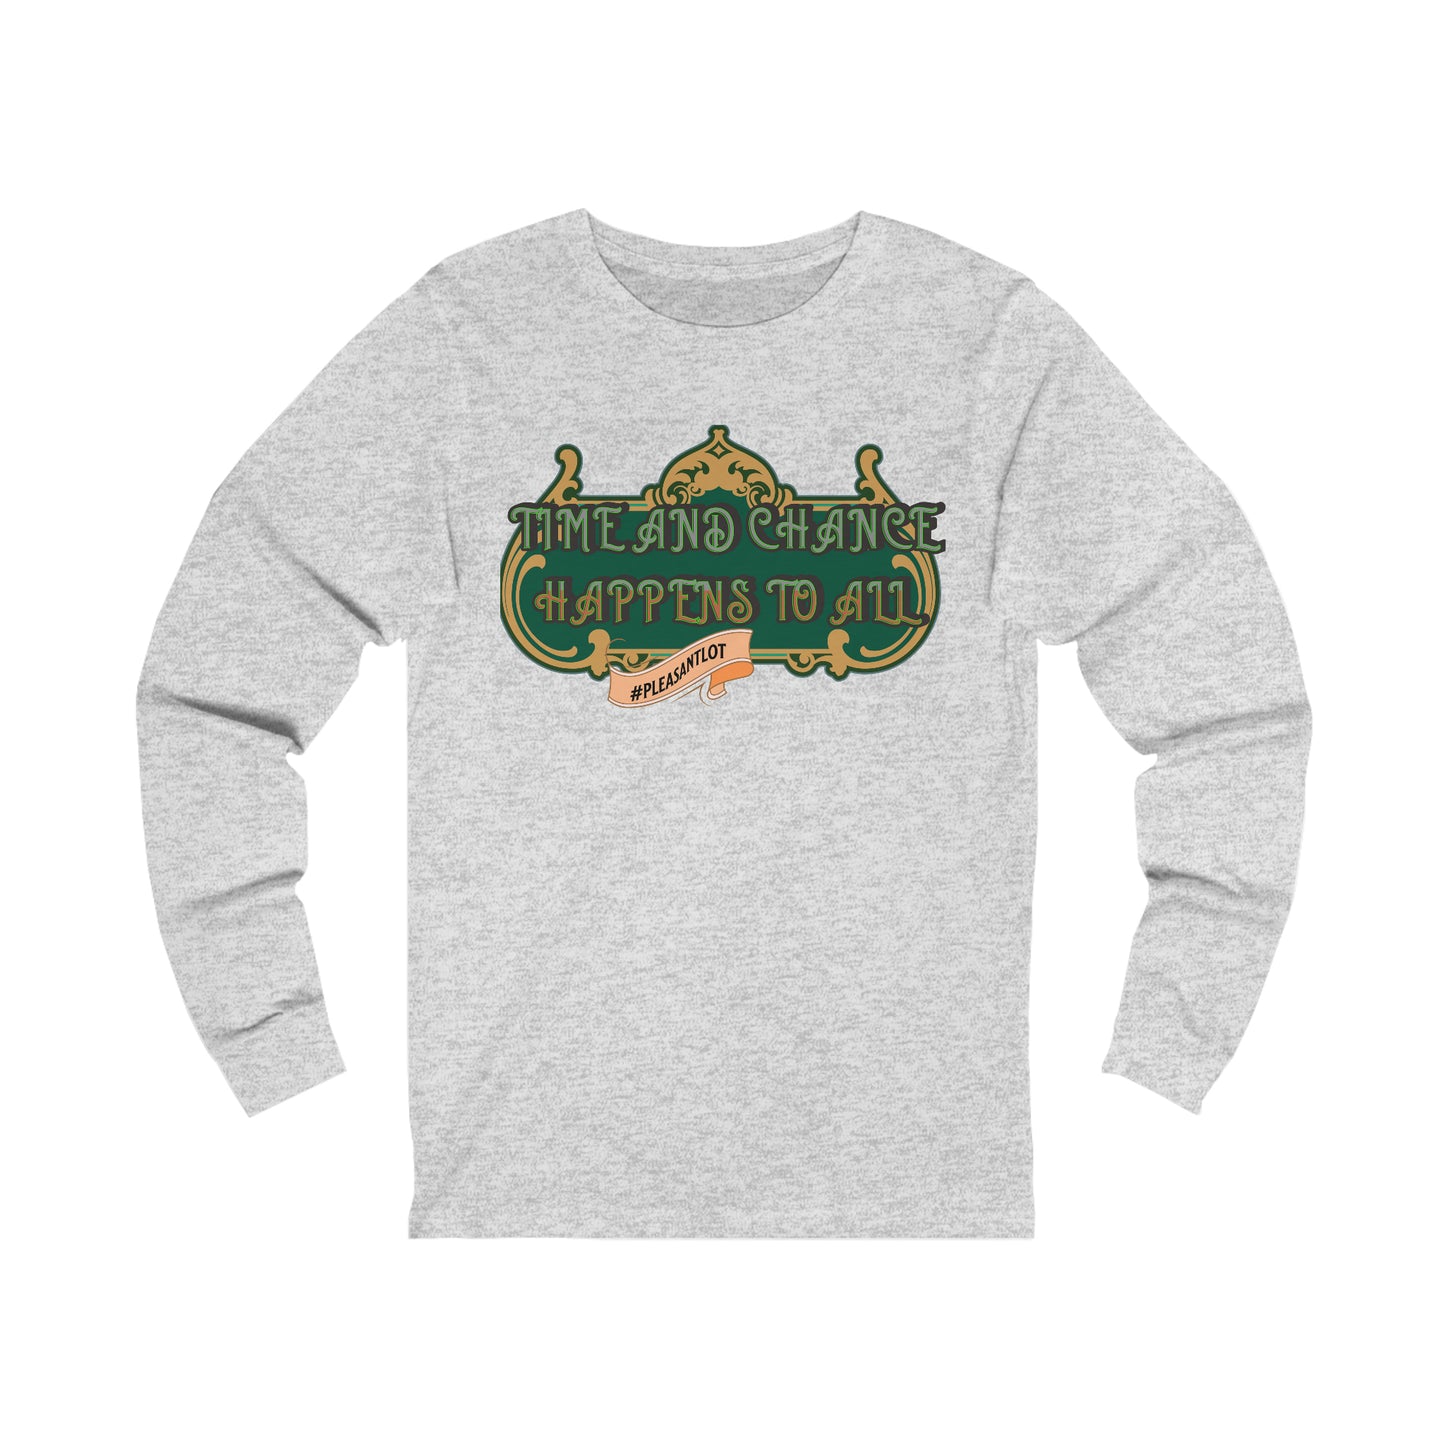 Everyday Unisex Longsleeve Shirt, Men and Women sweet attire (Time And Chance Happens To All), Green and Gold Design